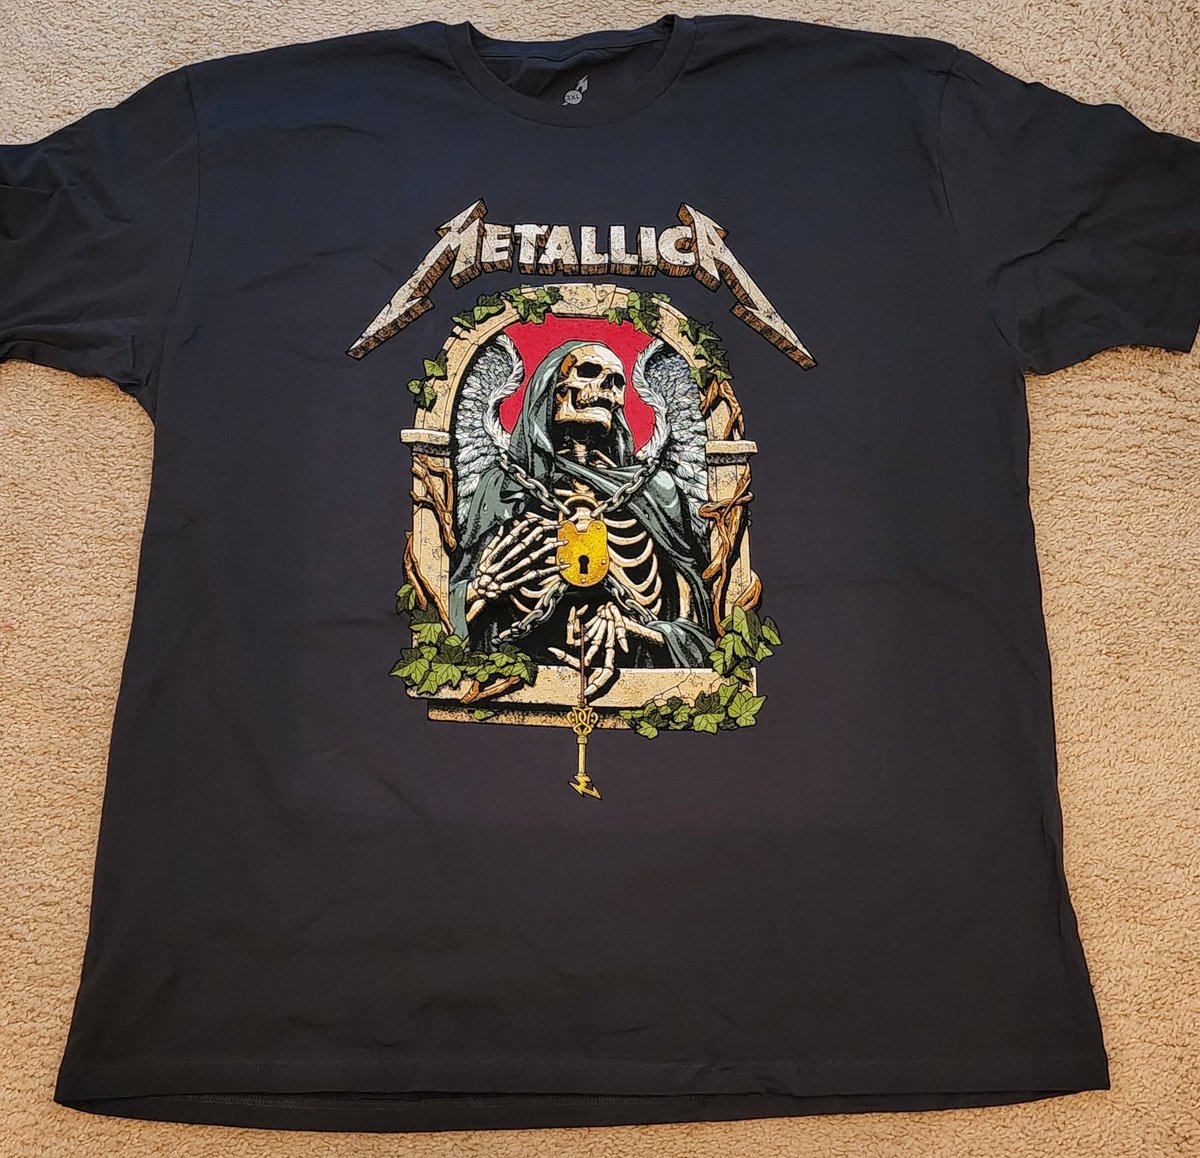 Here's the #Metal shirt of the night from this year's edition of #Metallica's #MonthsOfGiving2022 benefiting @WCKitchen's #ChefsForUkraine. Amazing art provided by @Andrew_Cremeans.